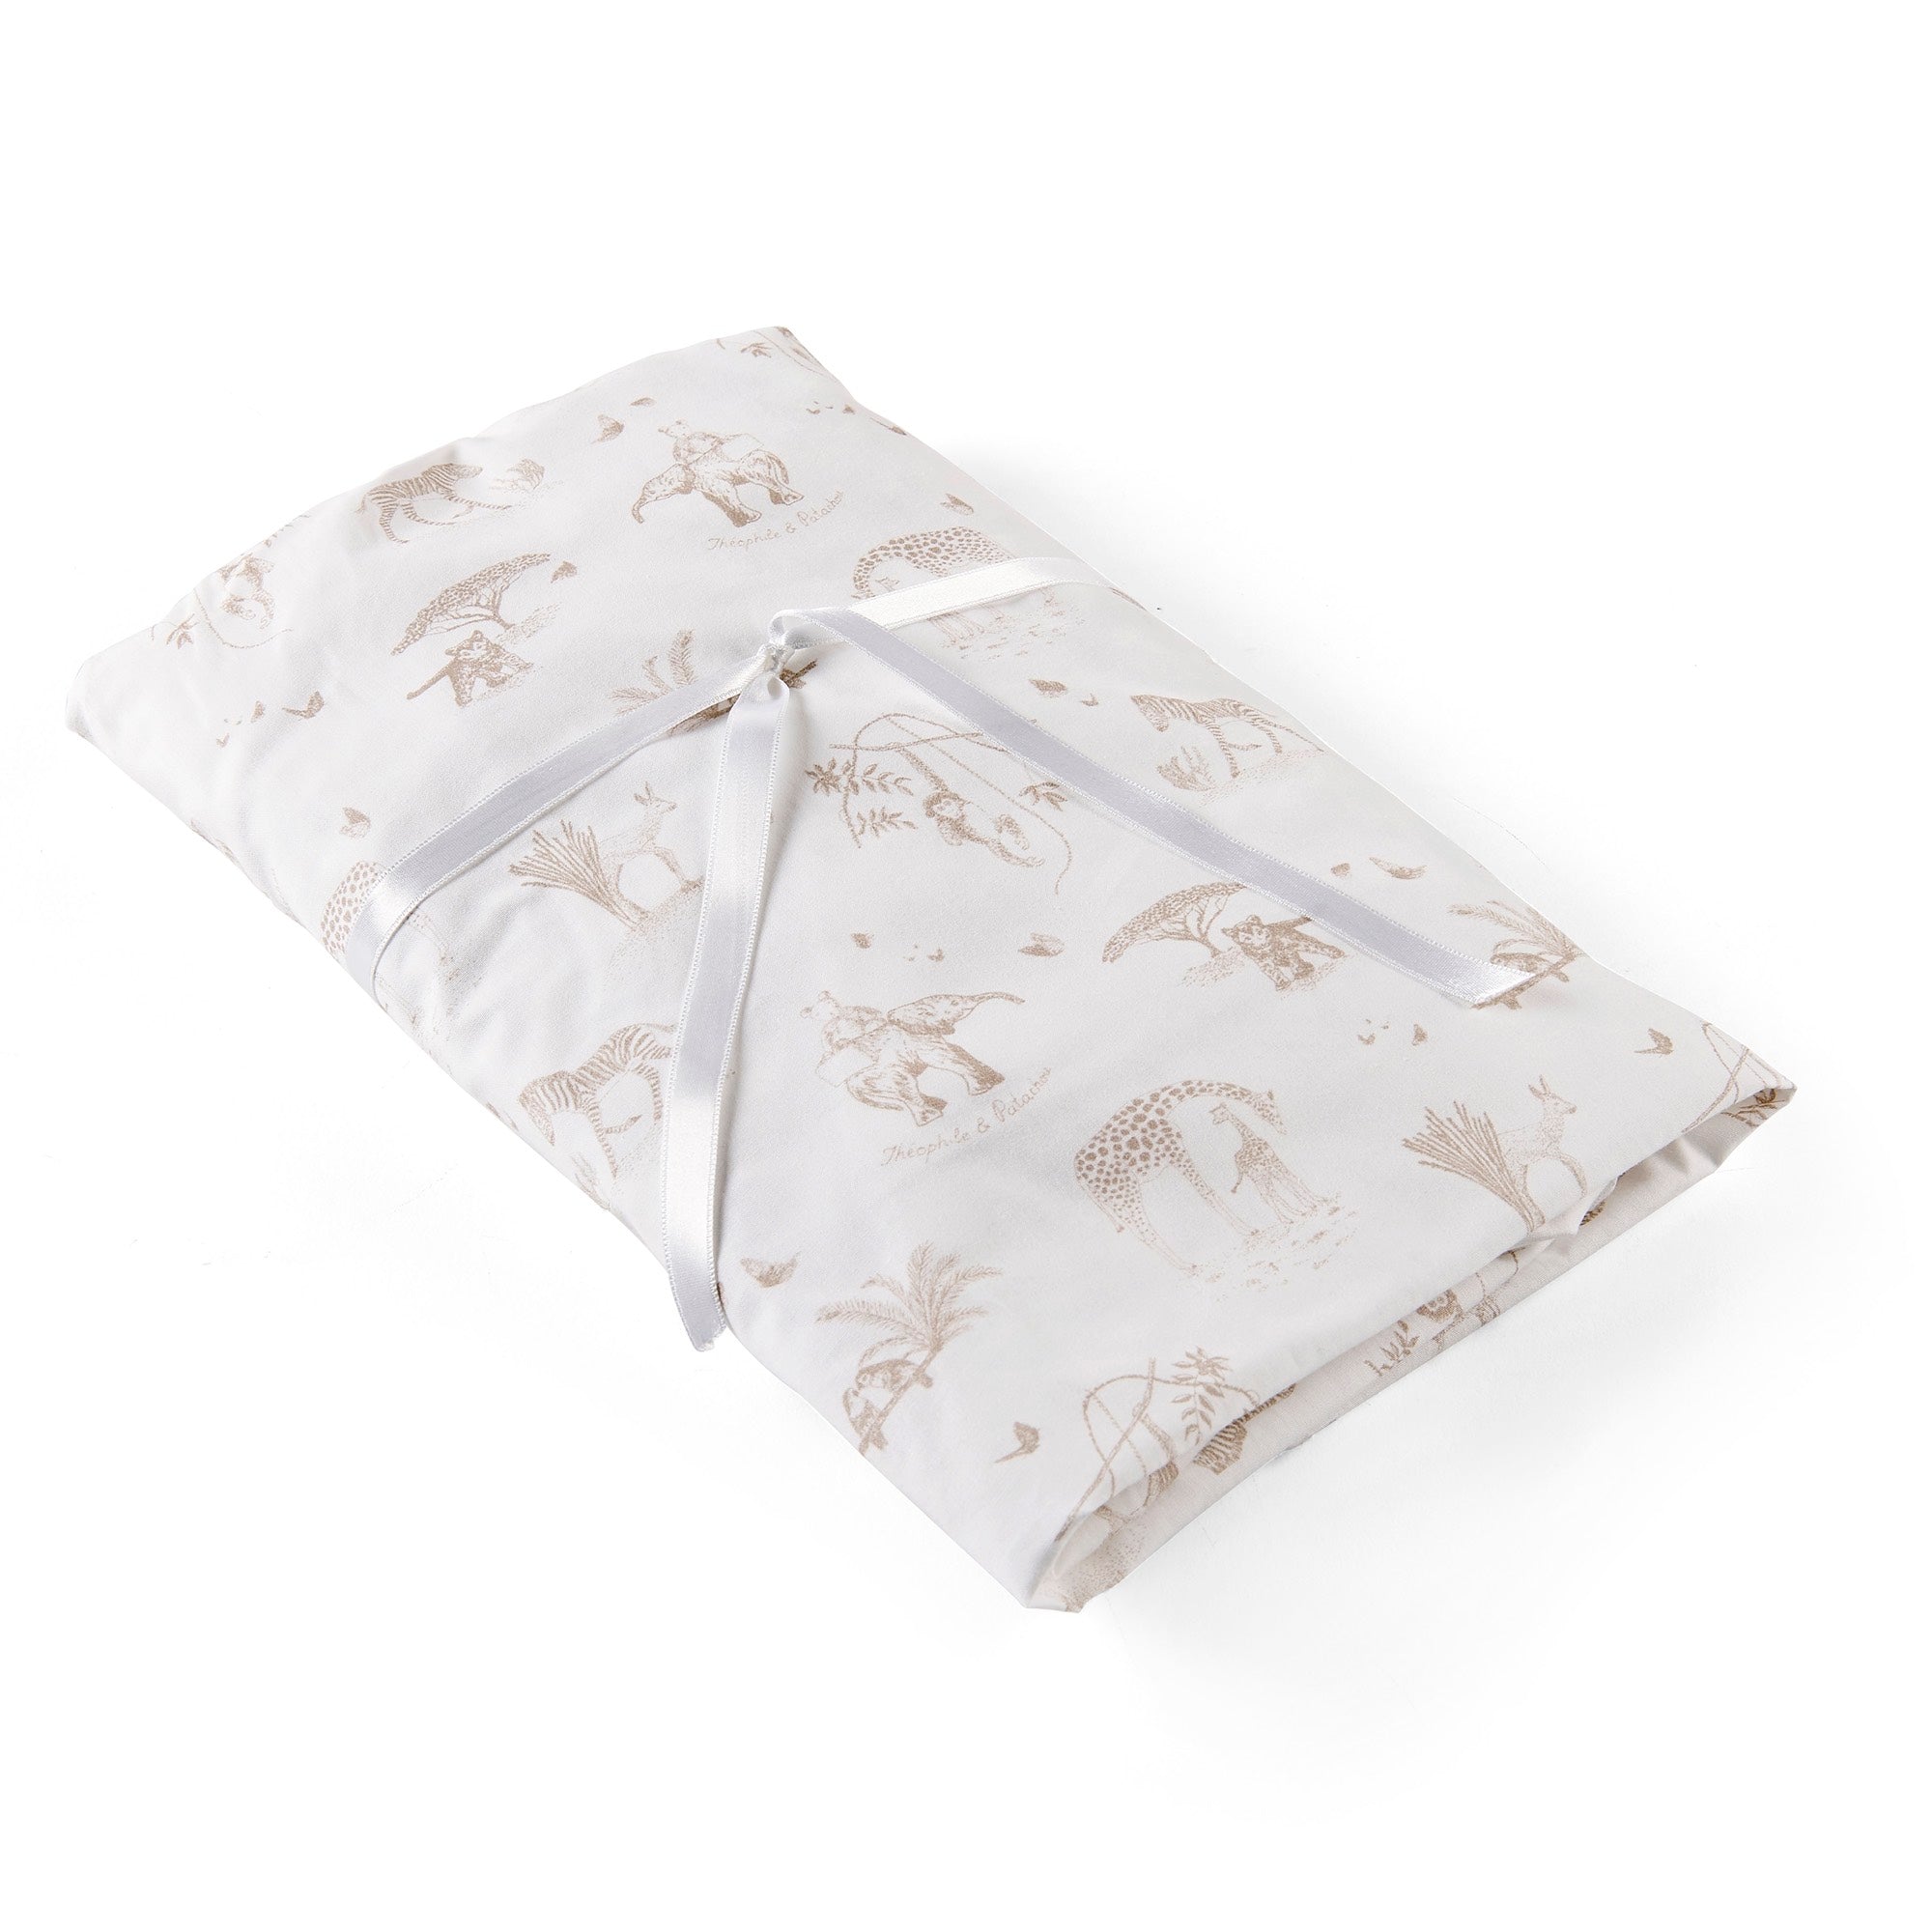 Theophile & Patachou Cot Bed Fitted Sheet 60x120cm - Safari